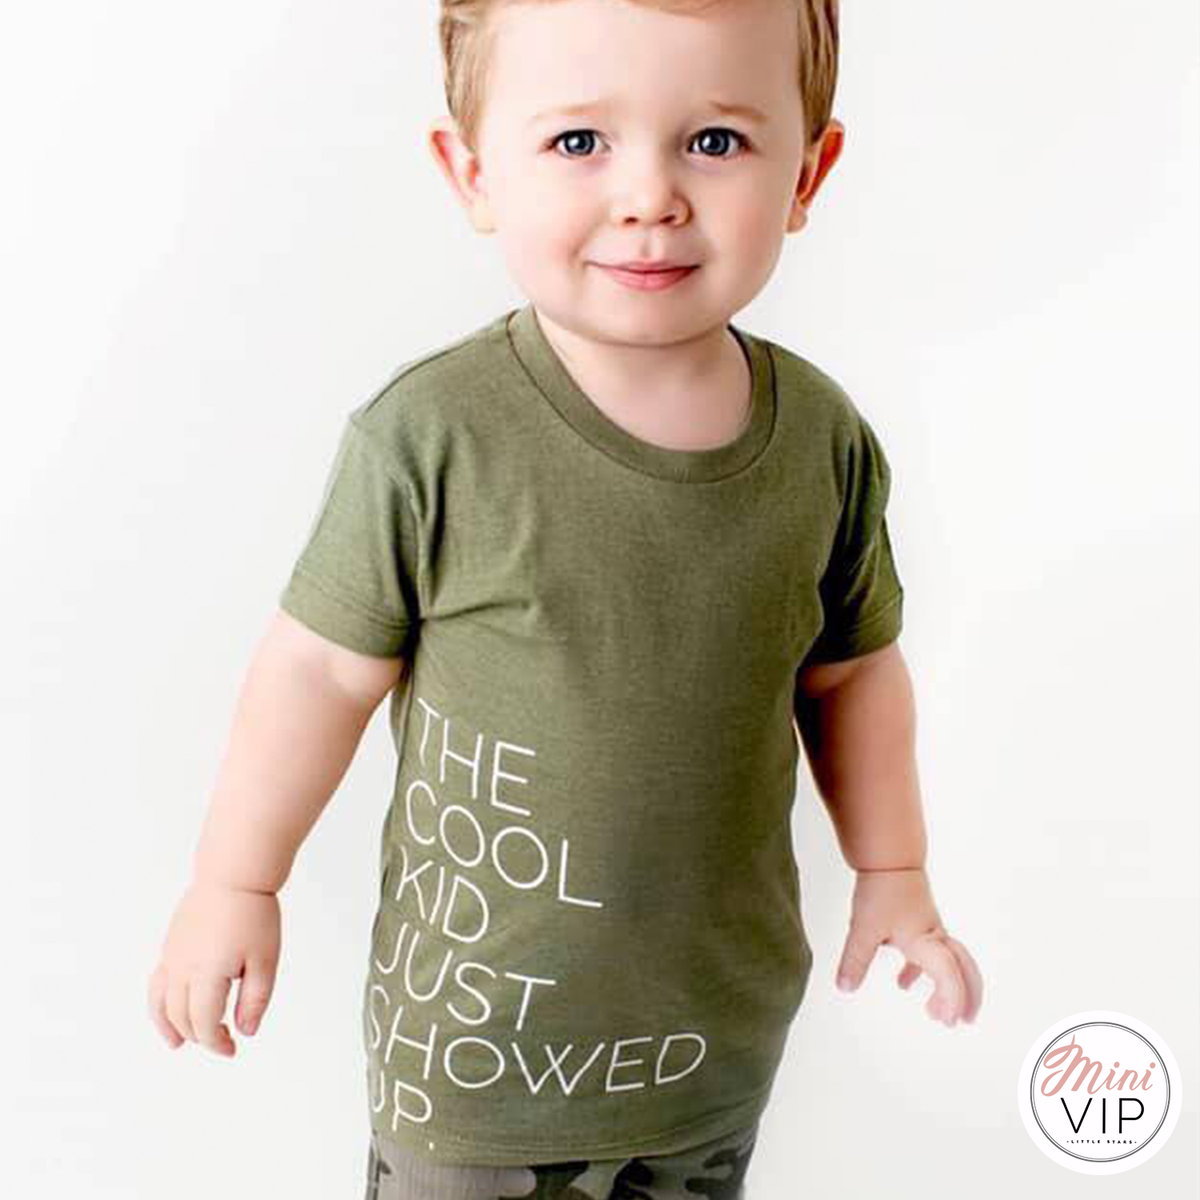 The Cool Kid just showed up khaki t-shirt